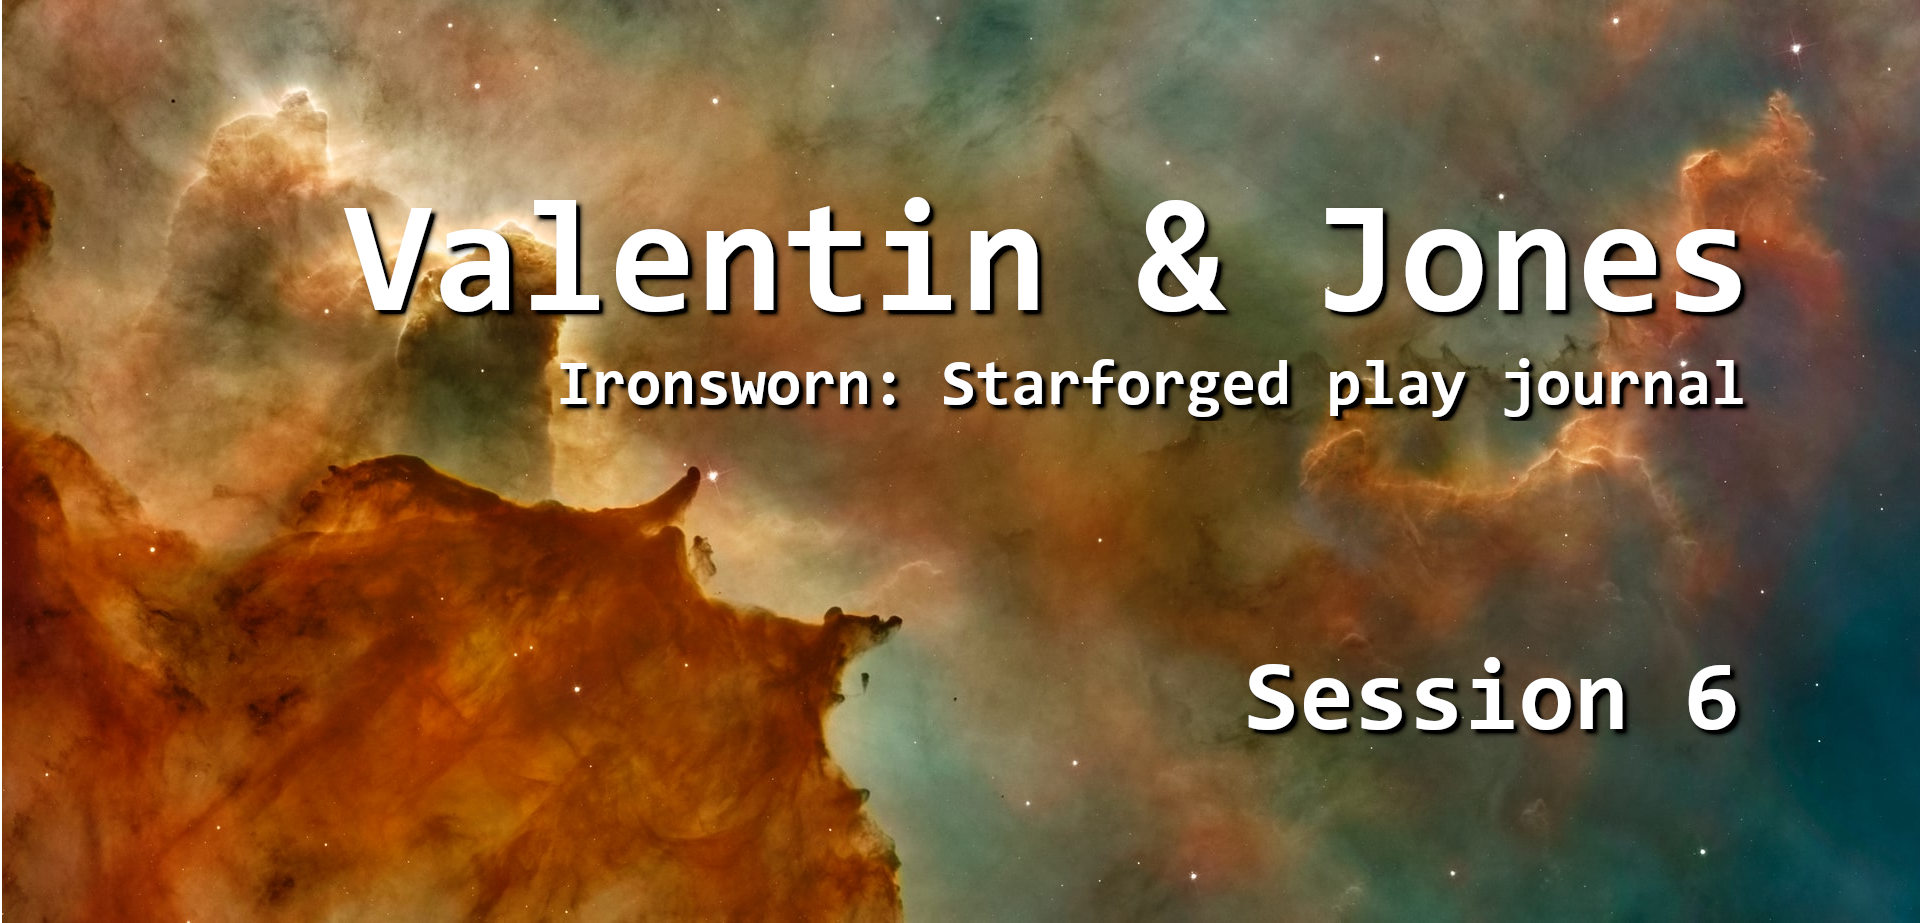 Valentin & Jones, Session 6, Starforged actual play journal